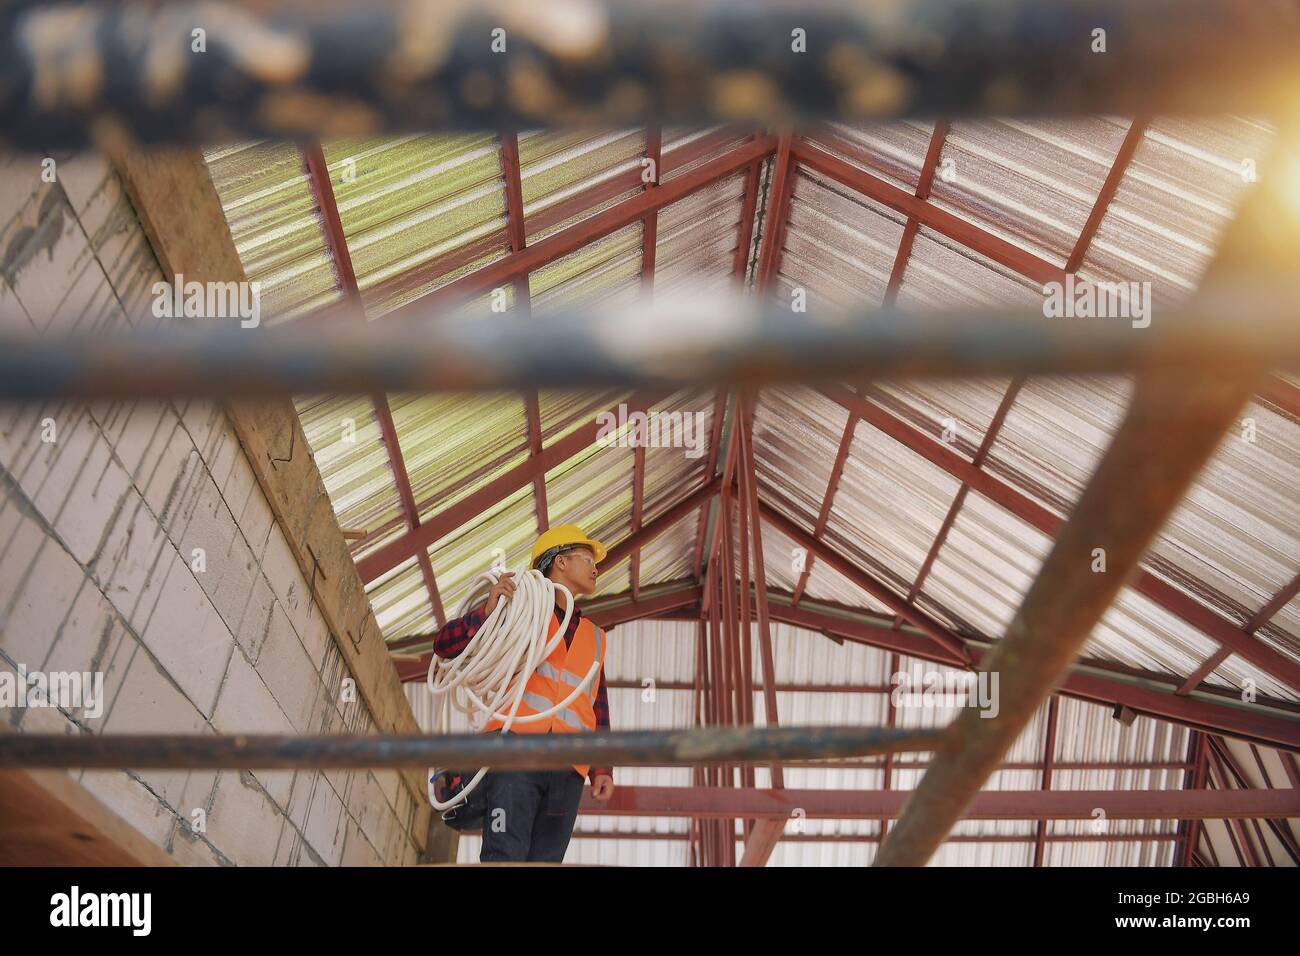 Low angle view of a construction worker standing on a building site carrying plastic pipe Stock Photo